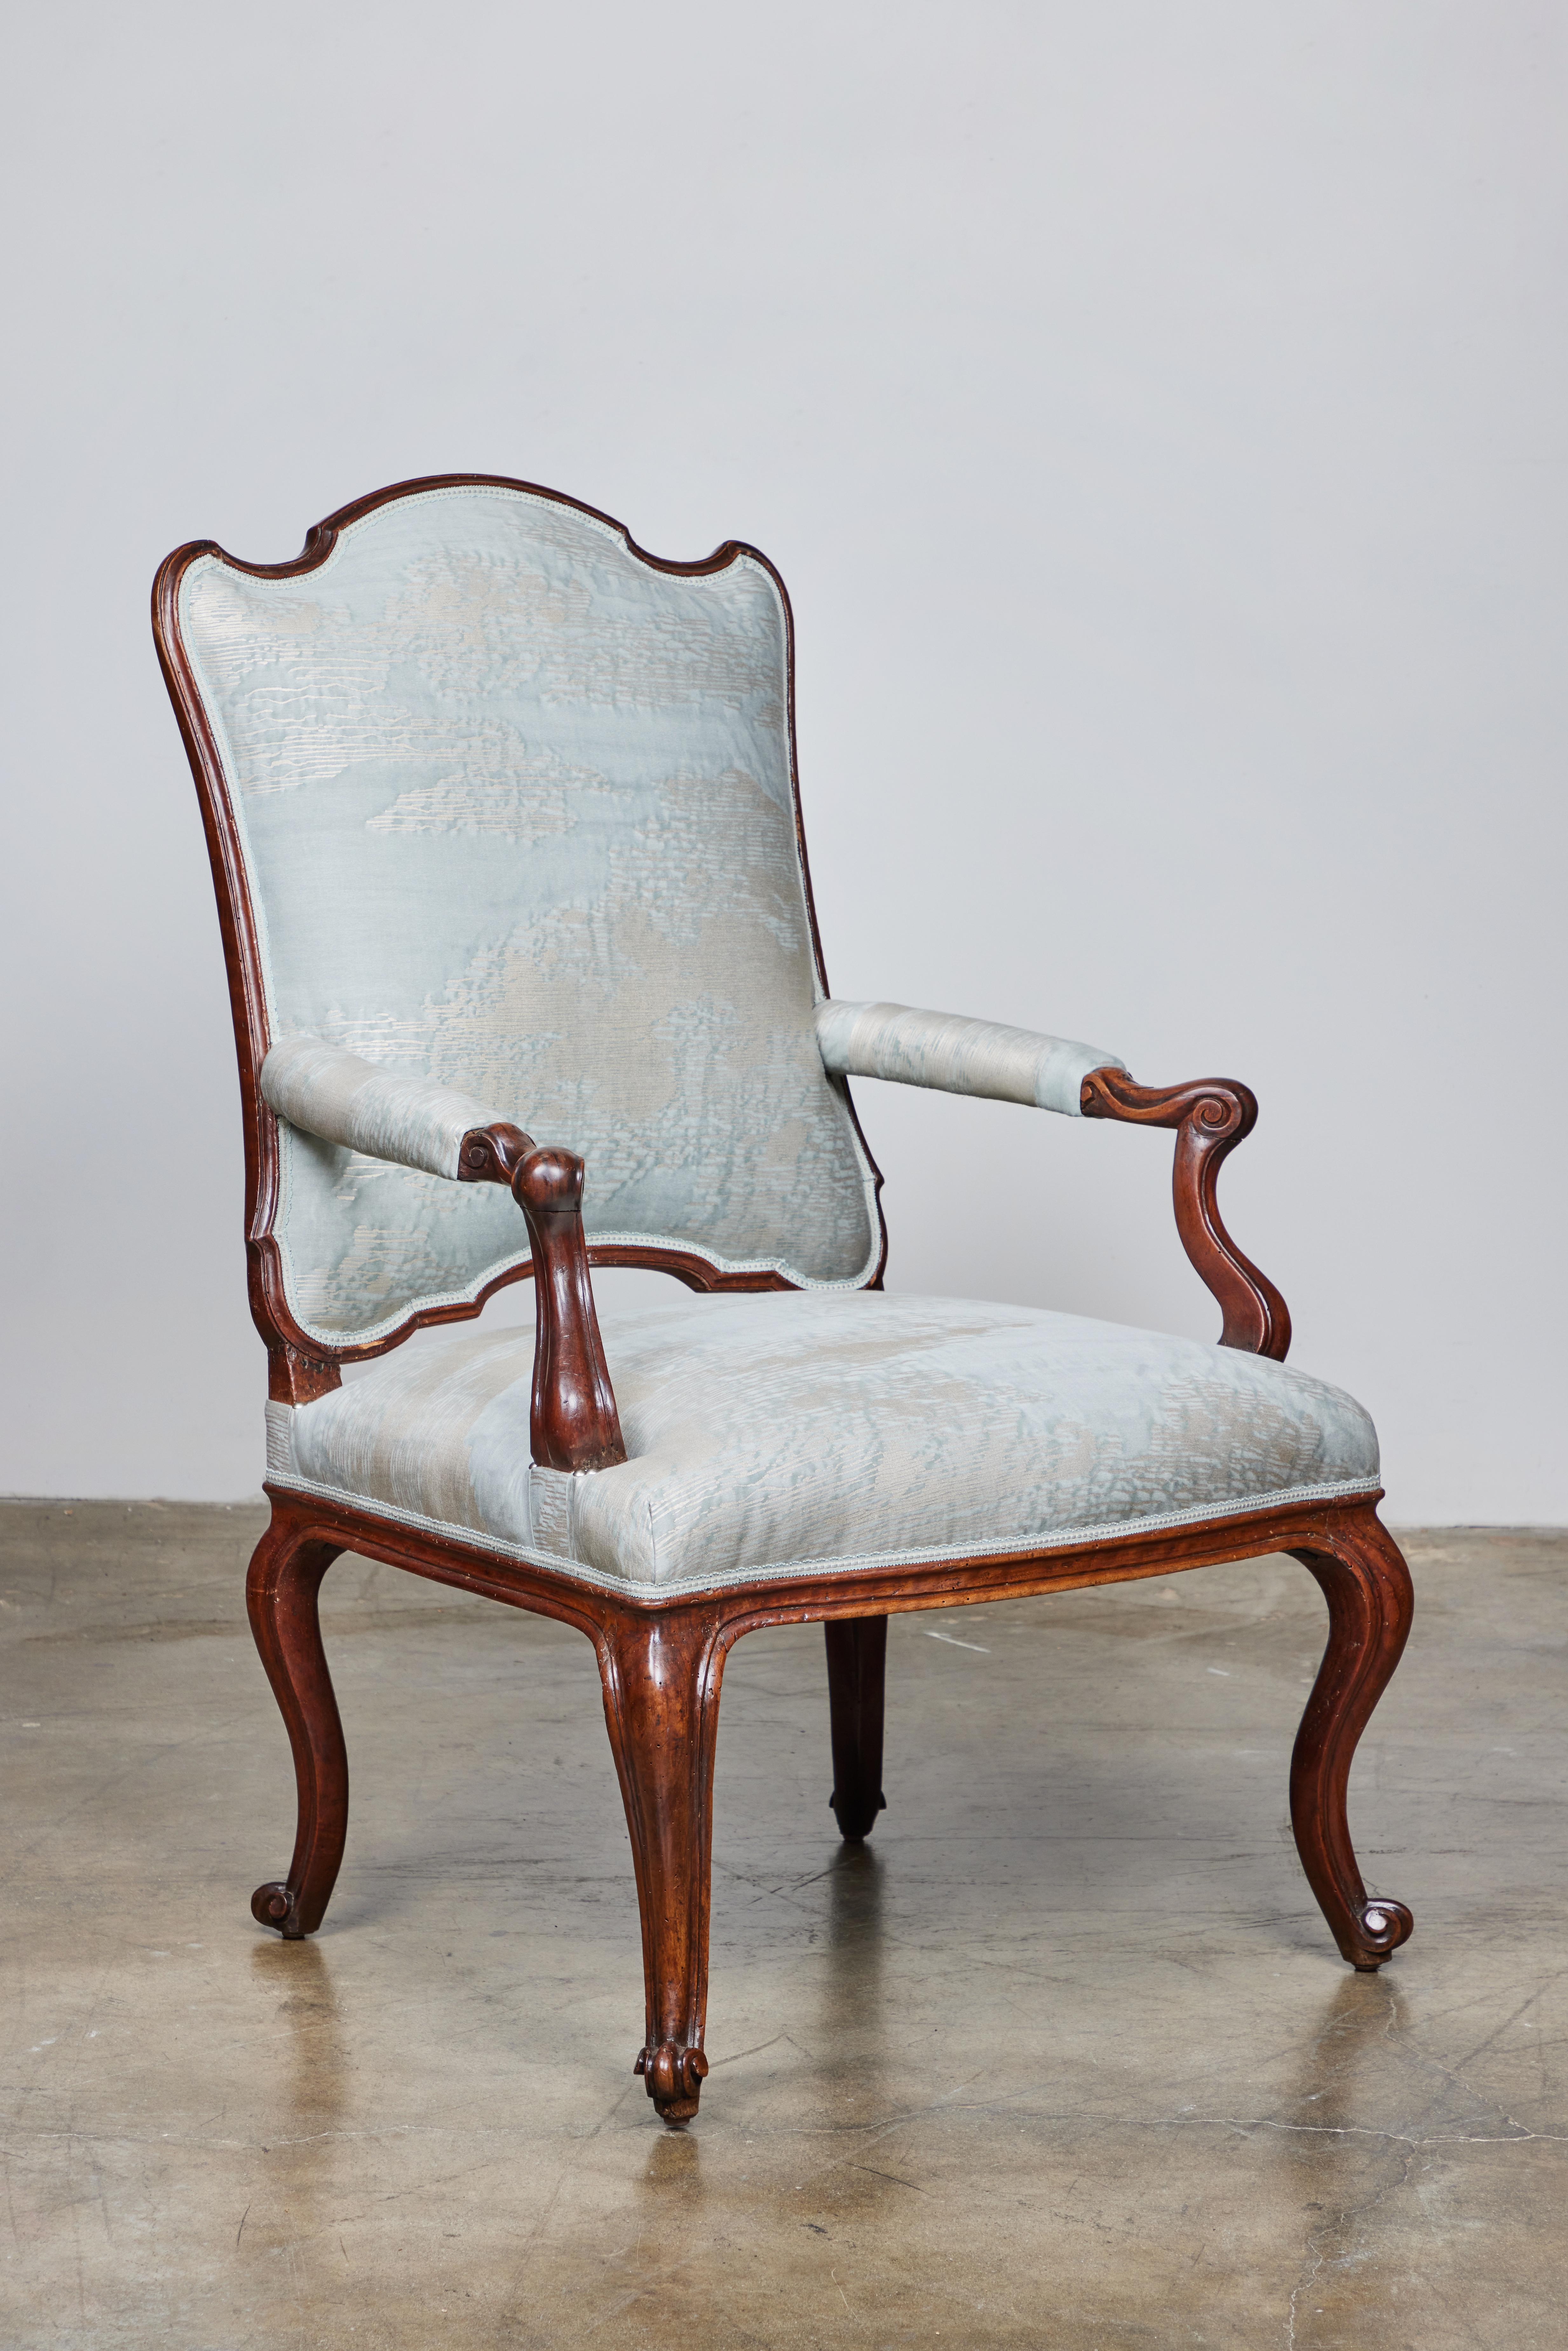 A beautifully carved walnut armchair newly upholstered in Fortuny fabric with trim and silver nail heads.